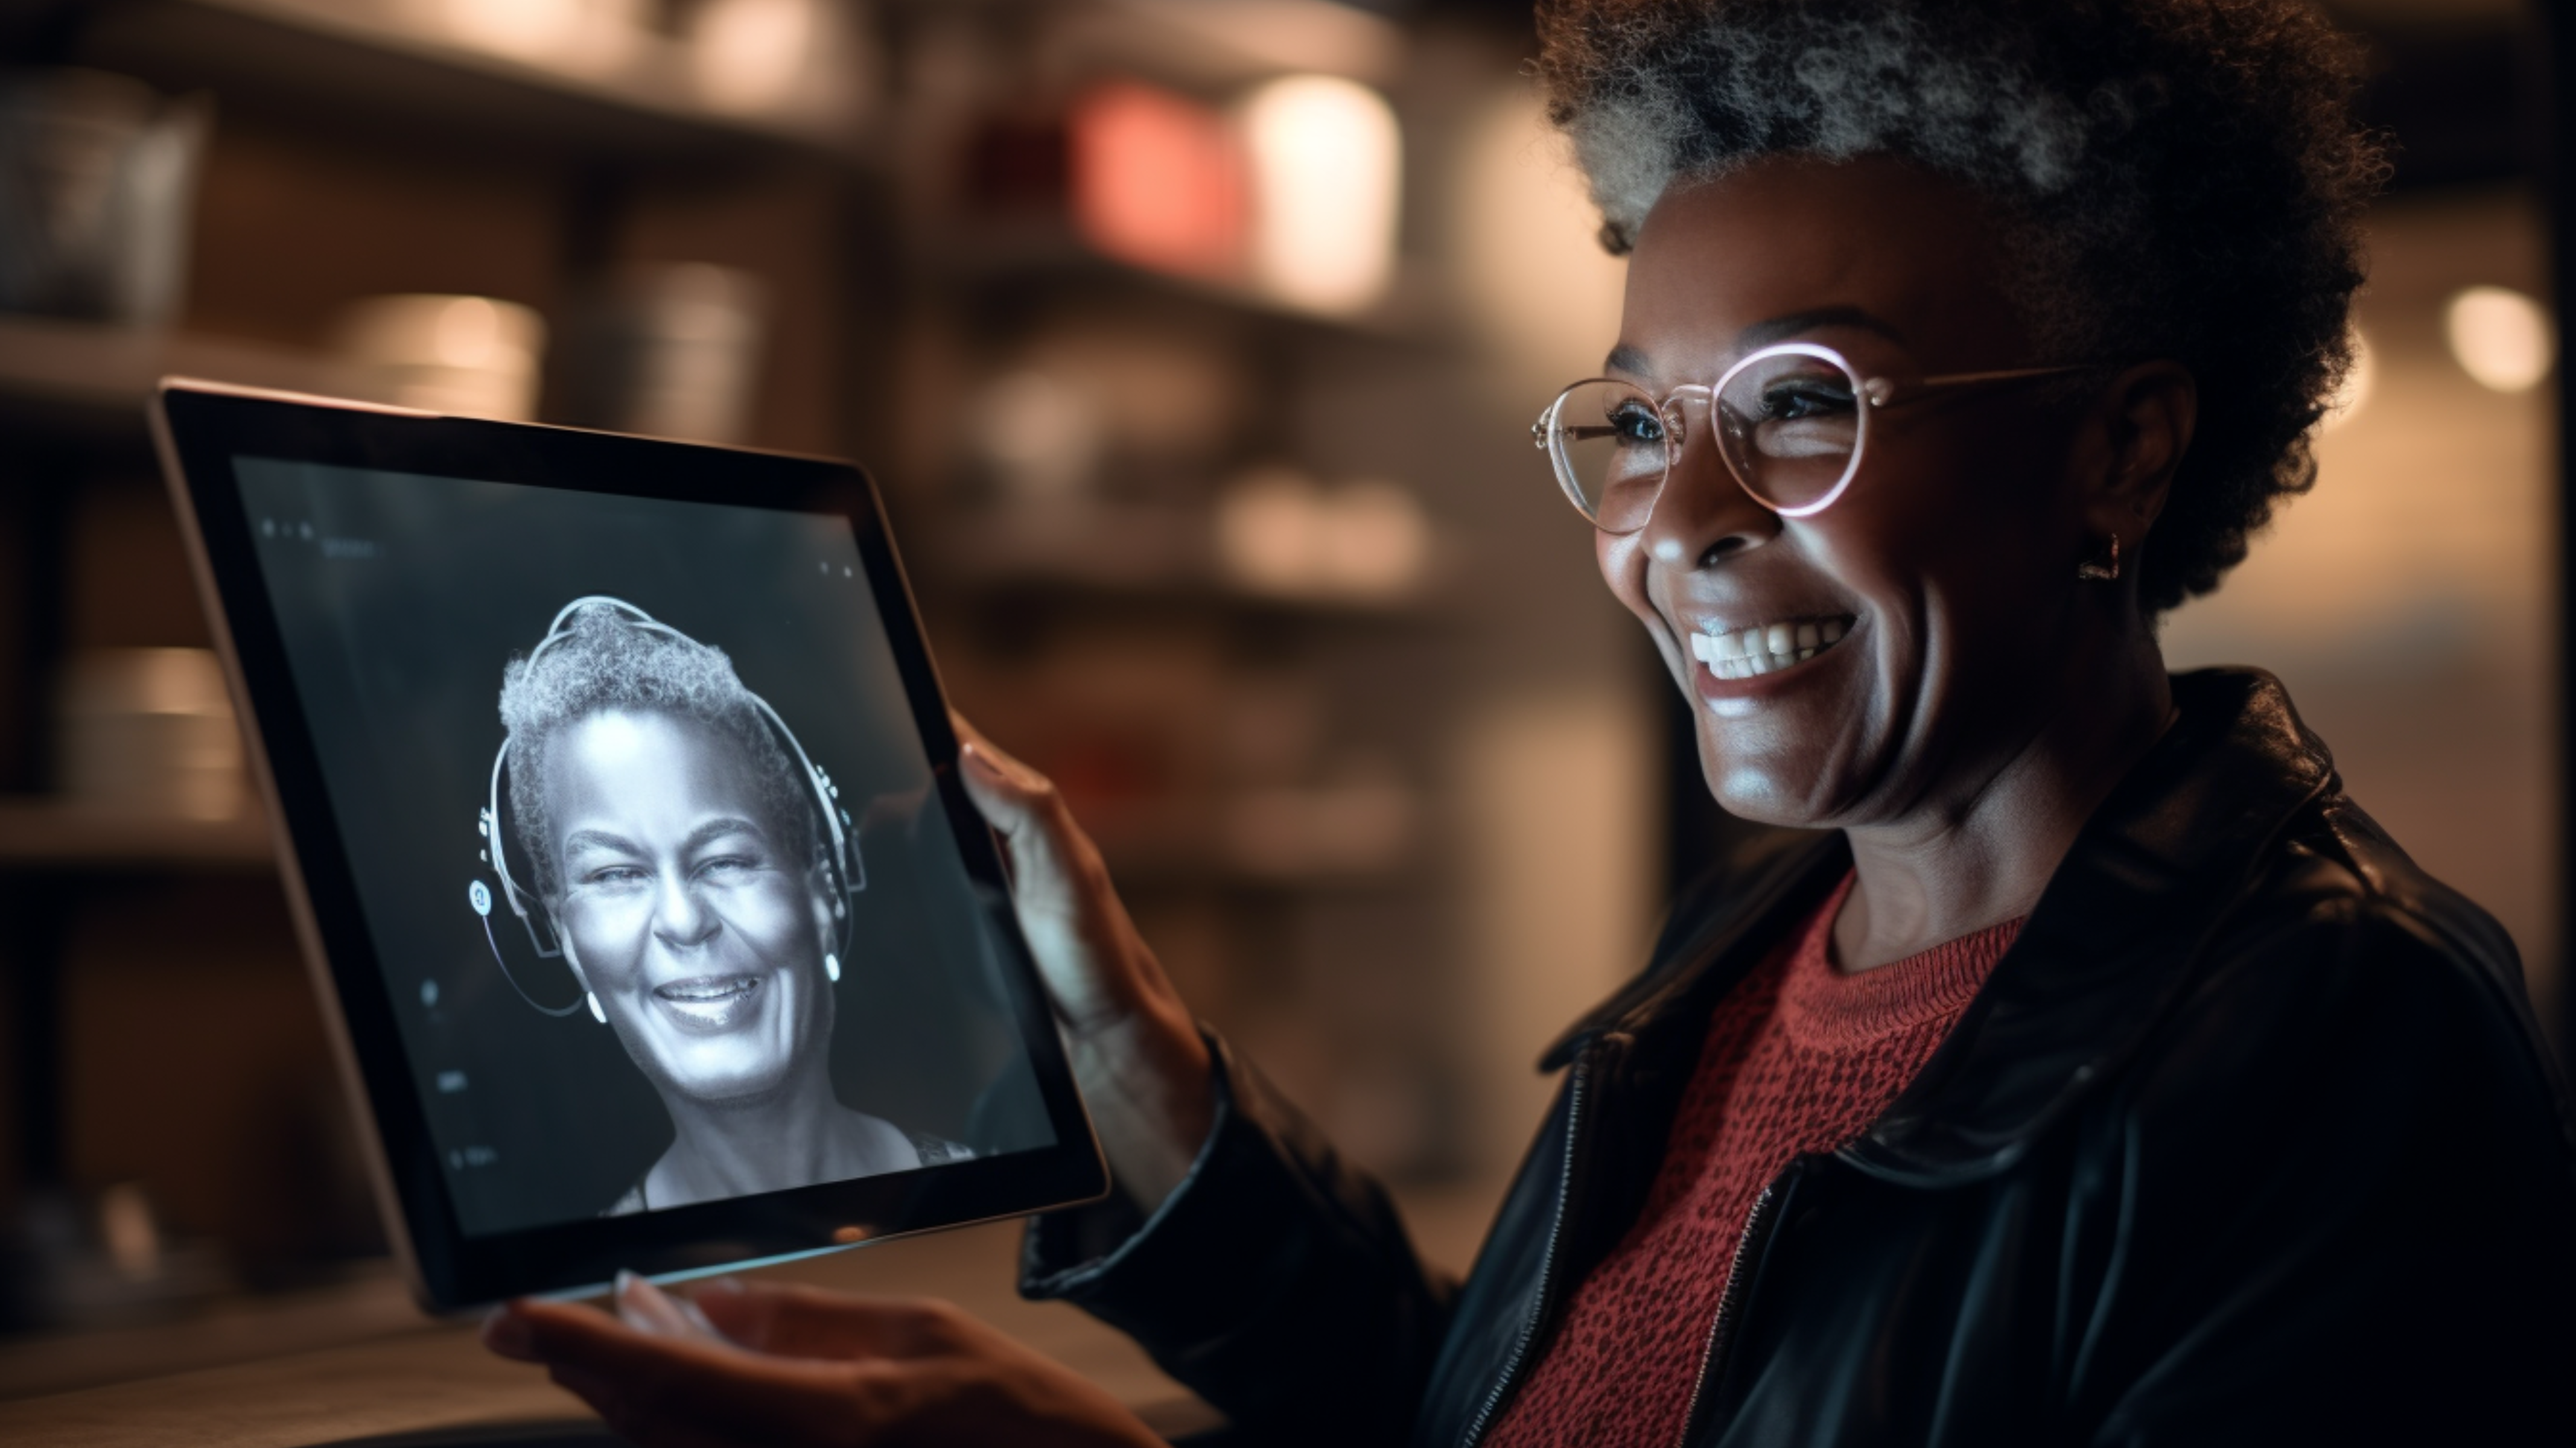 EON REALITY LAUNCHES ‘LIFELONG AI COMPANION’ TO REDEFINE AGING WITH AUGMENTED REALITY AND ARTIFICIAL INTELLIGENCE